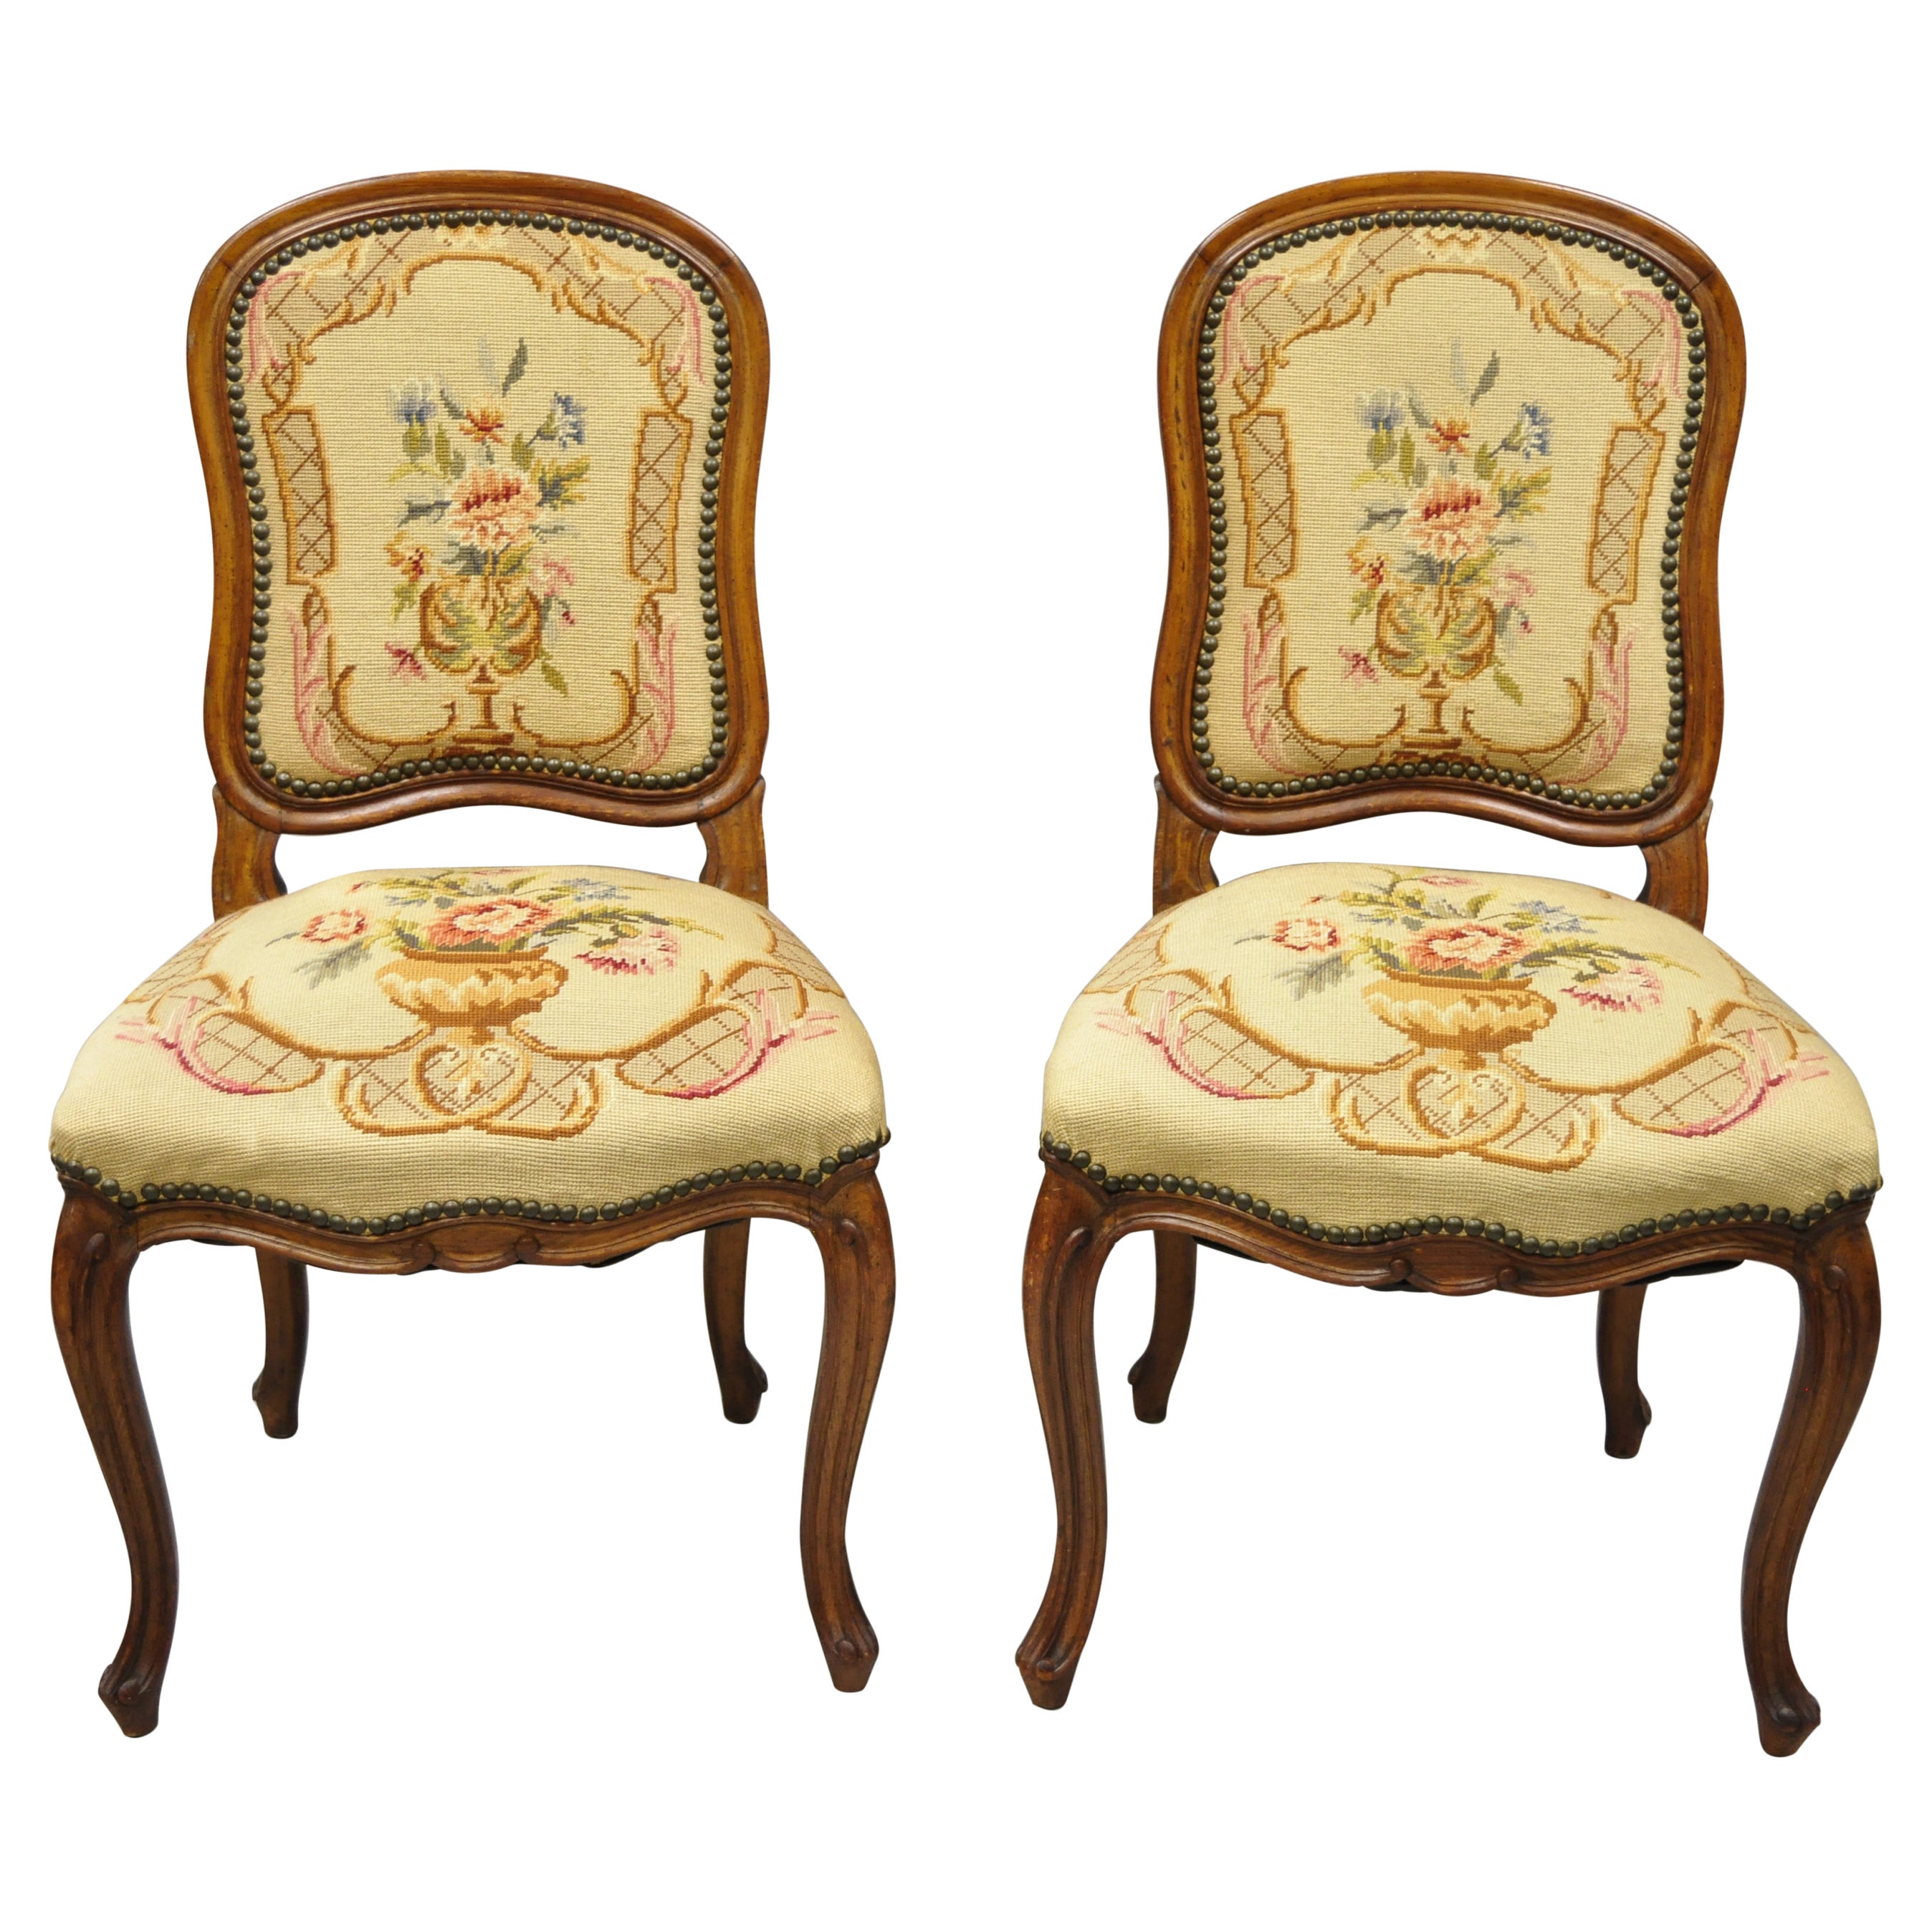 Antique French Provincial Louis XV Walnut Floral Needlepoint Side Chair, a Pair For Sale